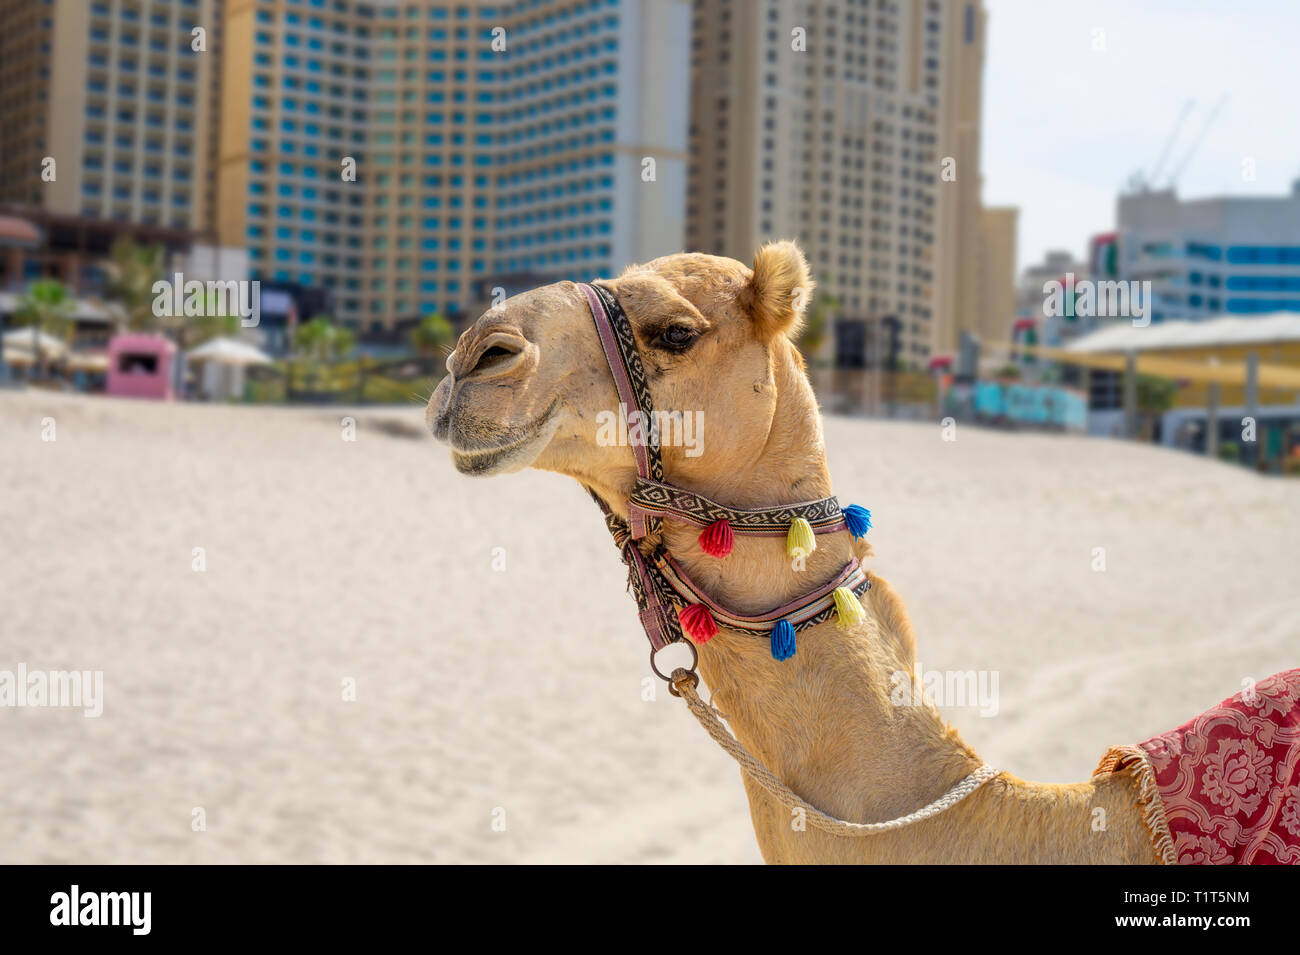 Colorful decorated Camel on the sandy Jumeirah JBR beach in Dubai with skyscrapers Stock Photo